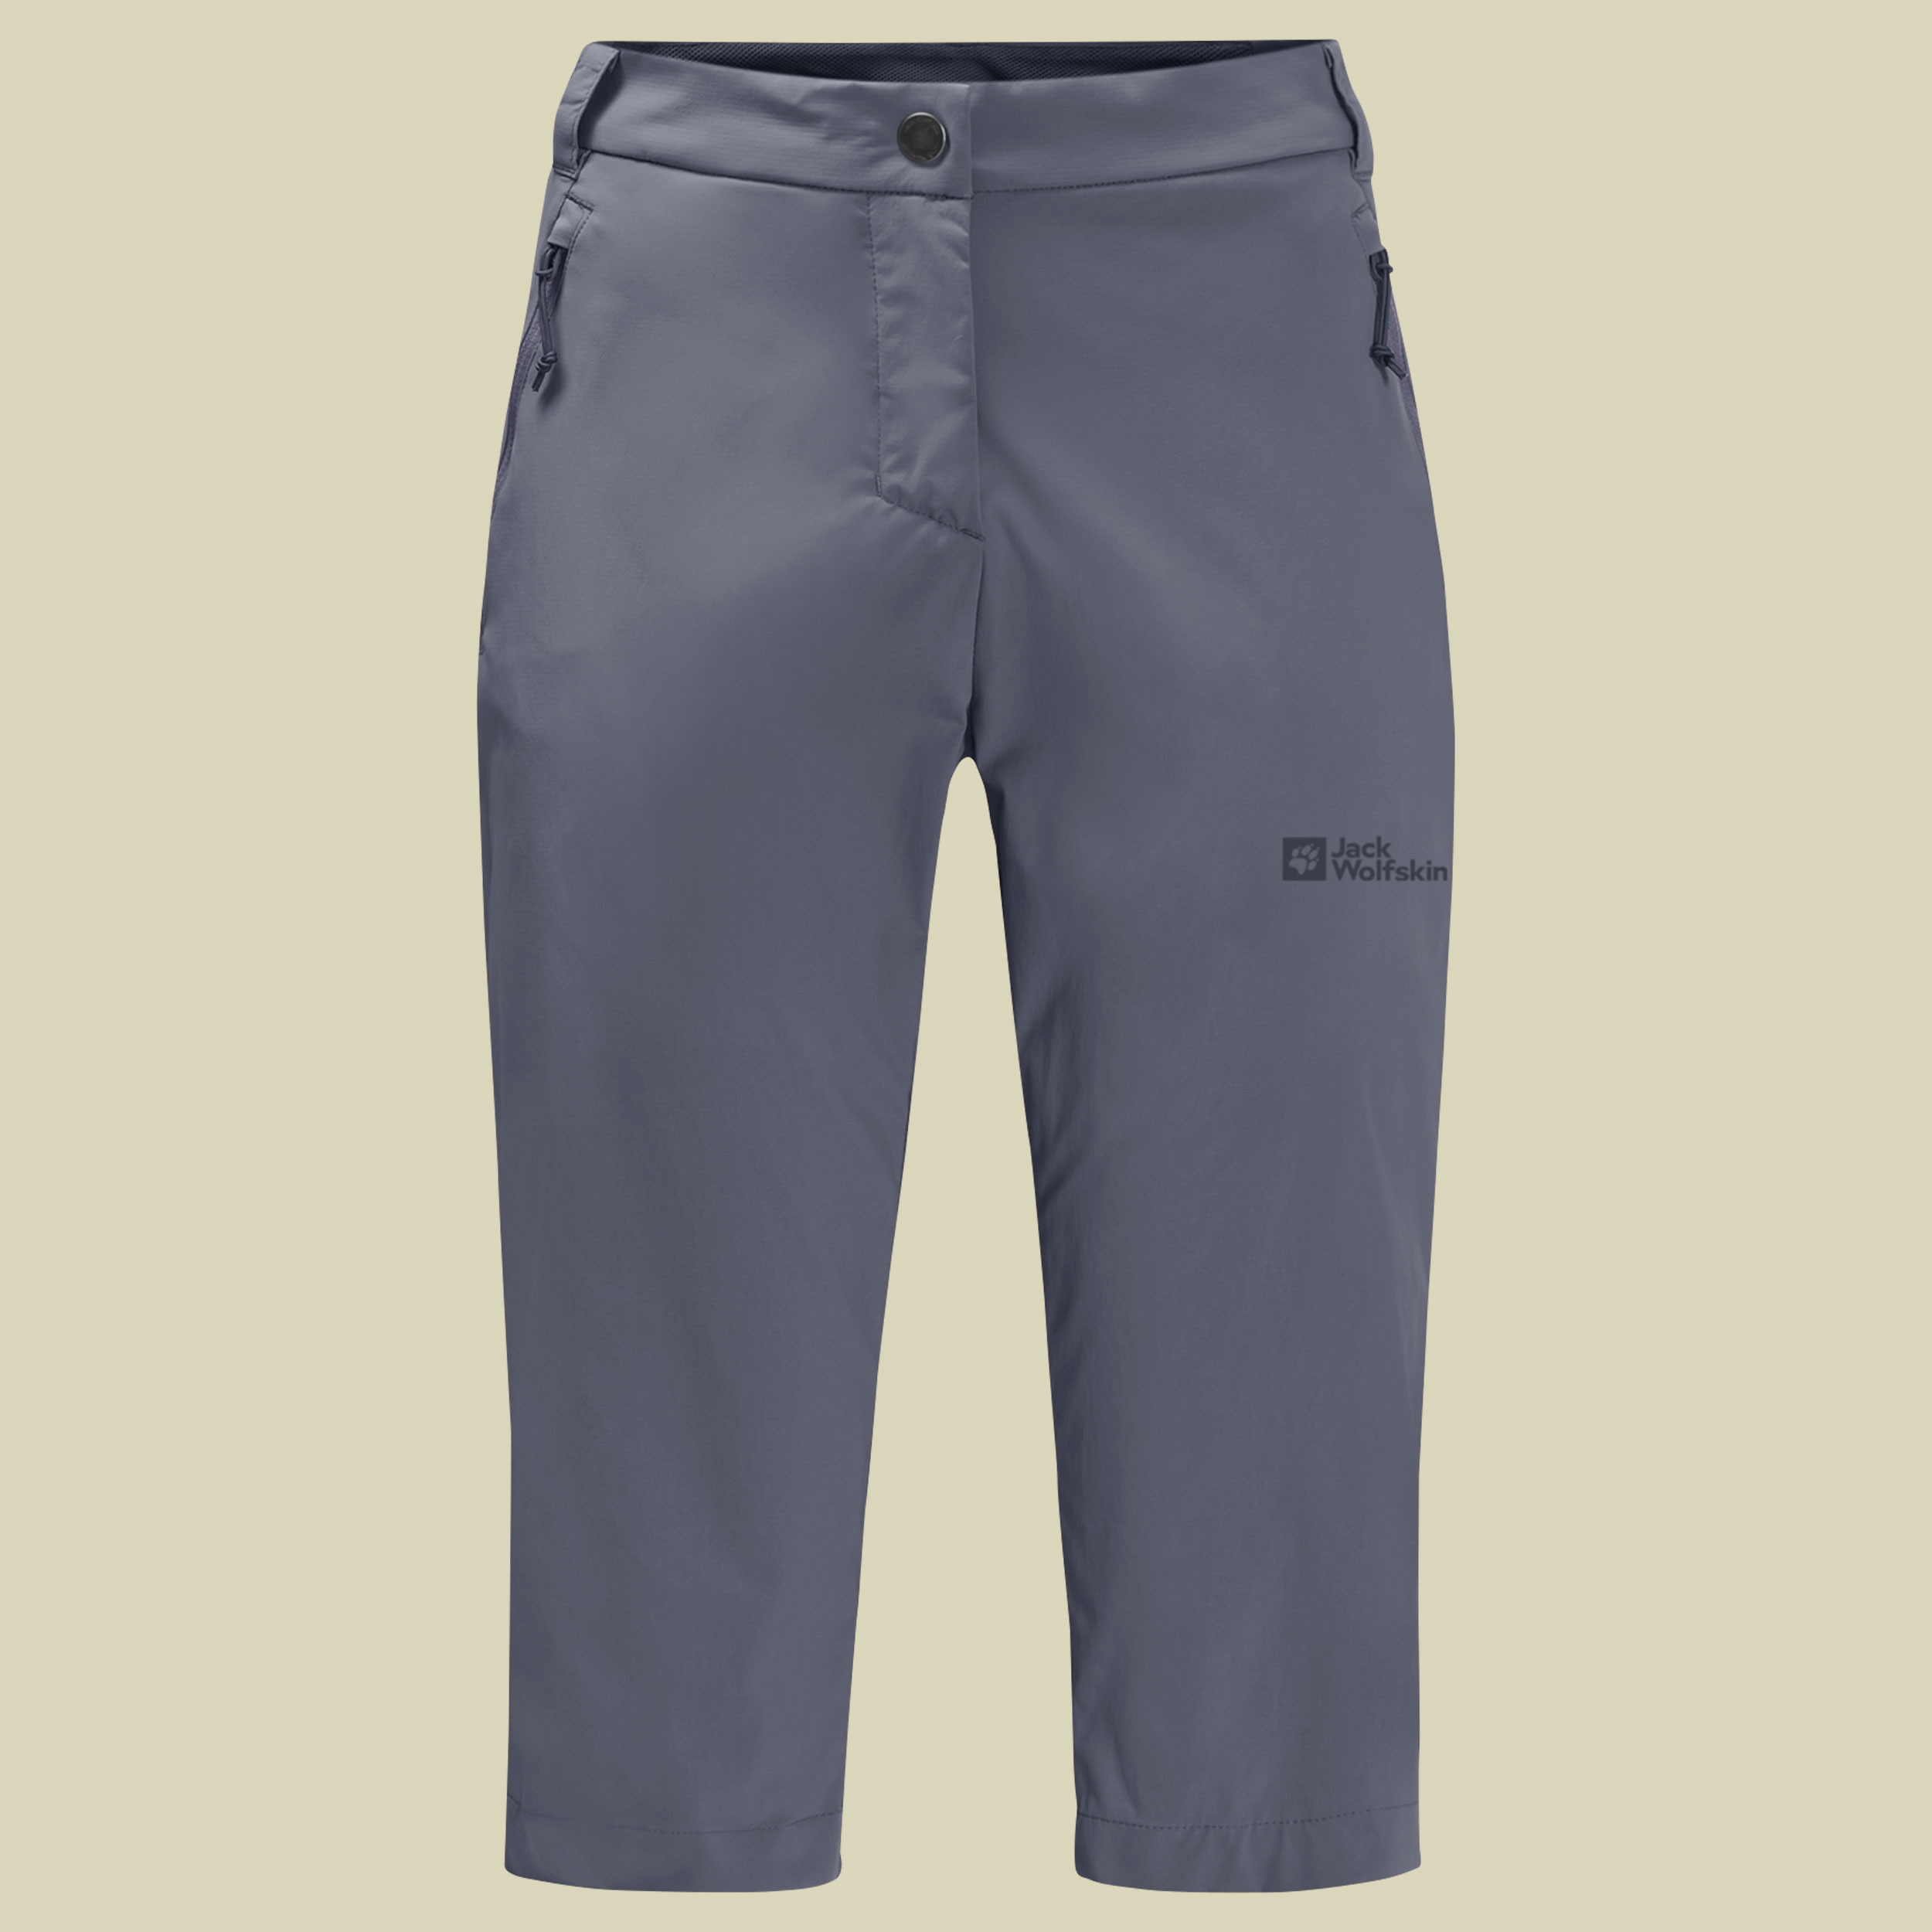 Activate Light ¾ Pants Women Größe 42 Farbe dolphin